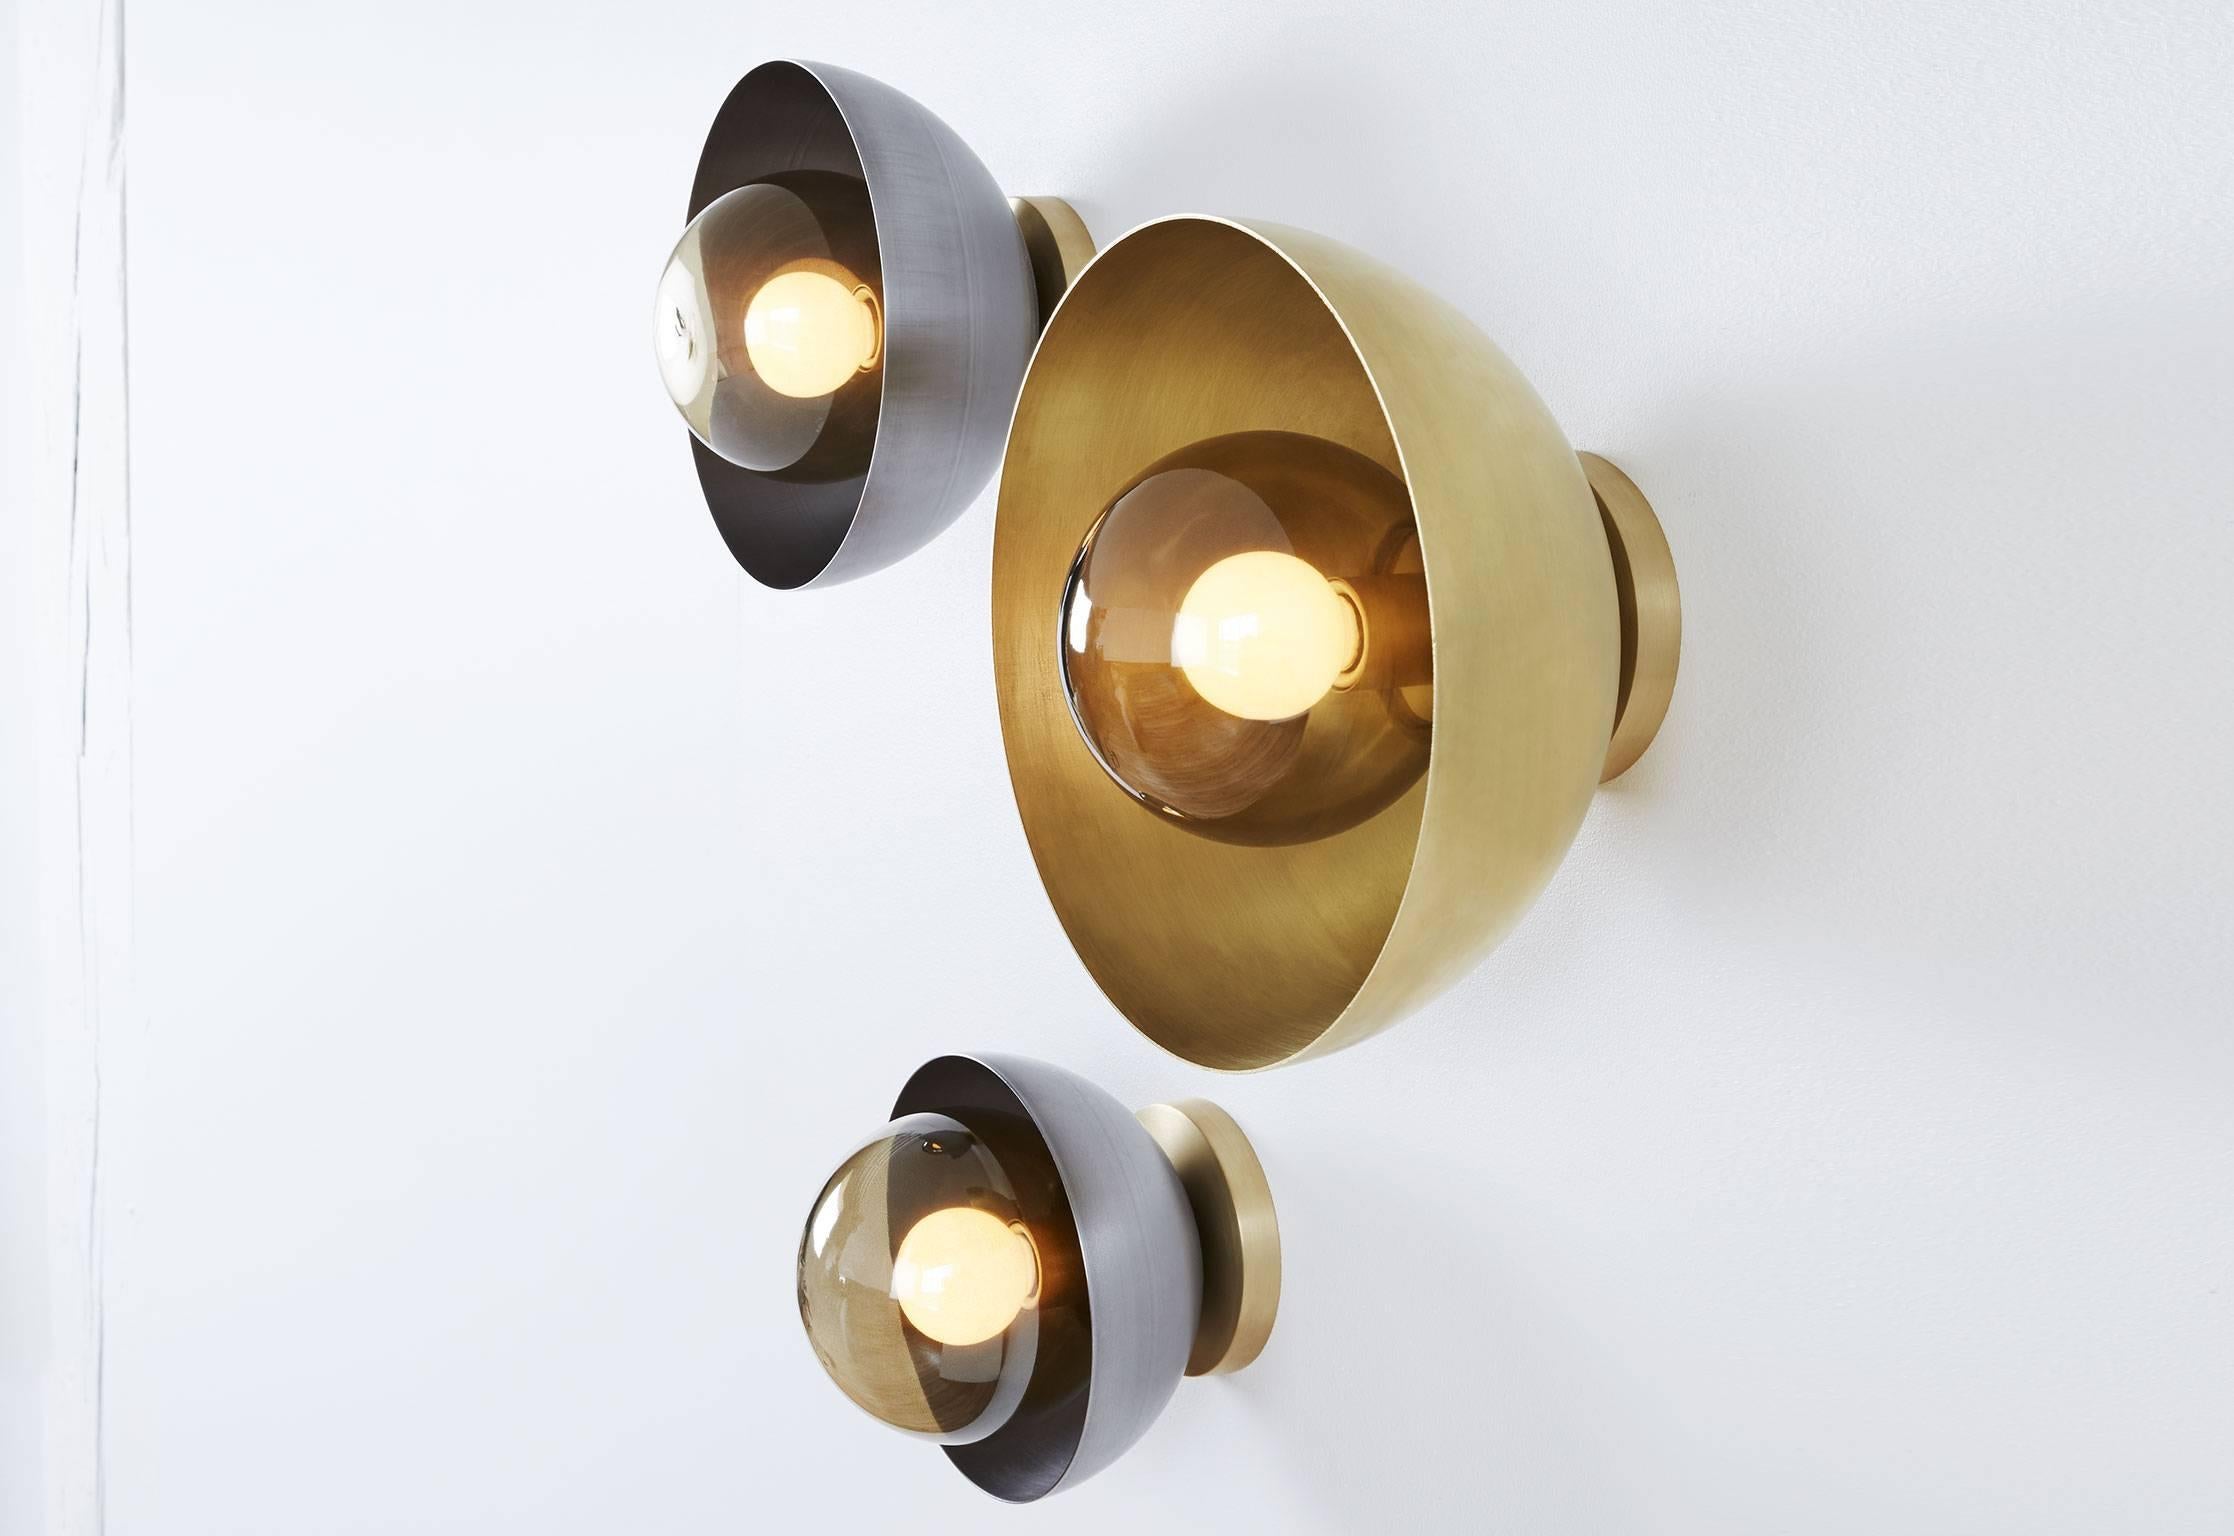 Concentric circles of handblown glass and solid metal ripple and reflect the glow of a single bulb. Elegant and simple but substantial, Curve redefines the traditional sconce.

Assembled and finished by hand in Toronto, Canada.

Curve sconces are